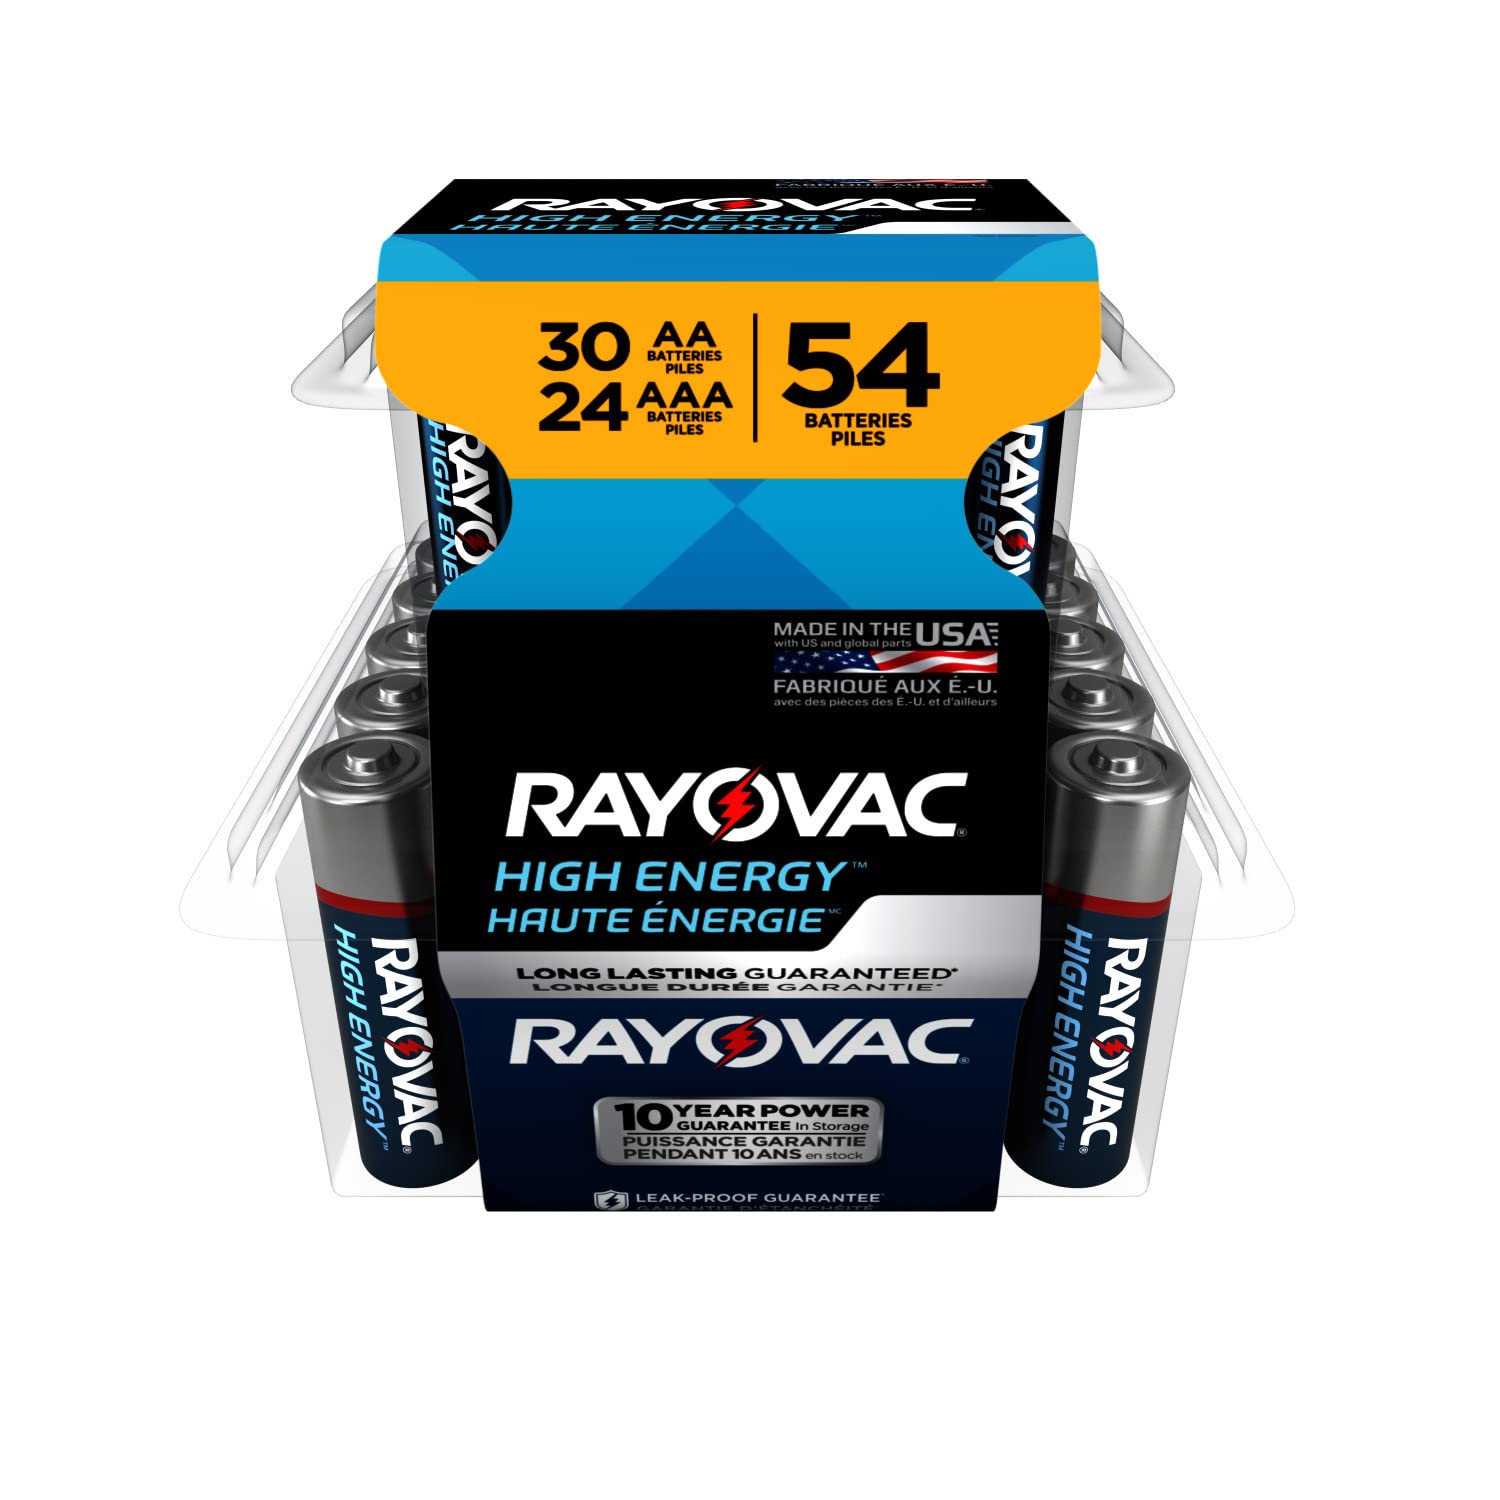 Rayovac AA Batteries & AAA Batteries Variety Pack, 24 Triple A Battery and 30 Double A Battery (54 Count)